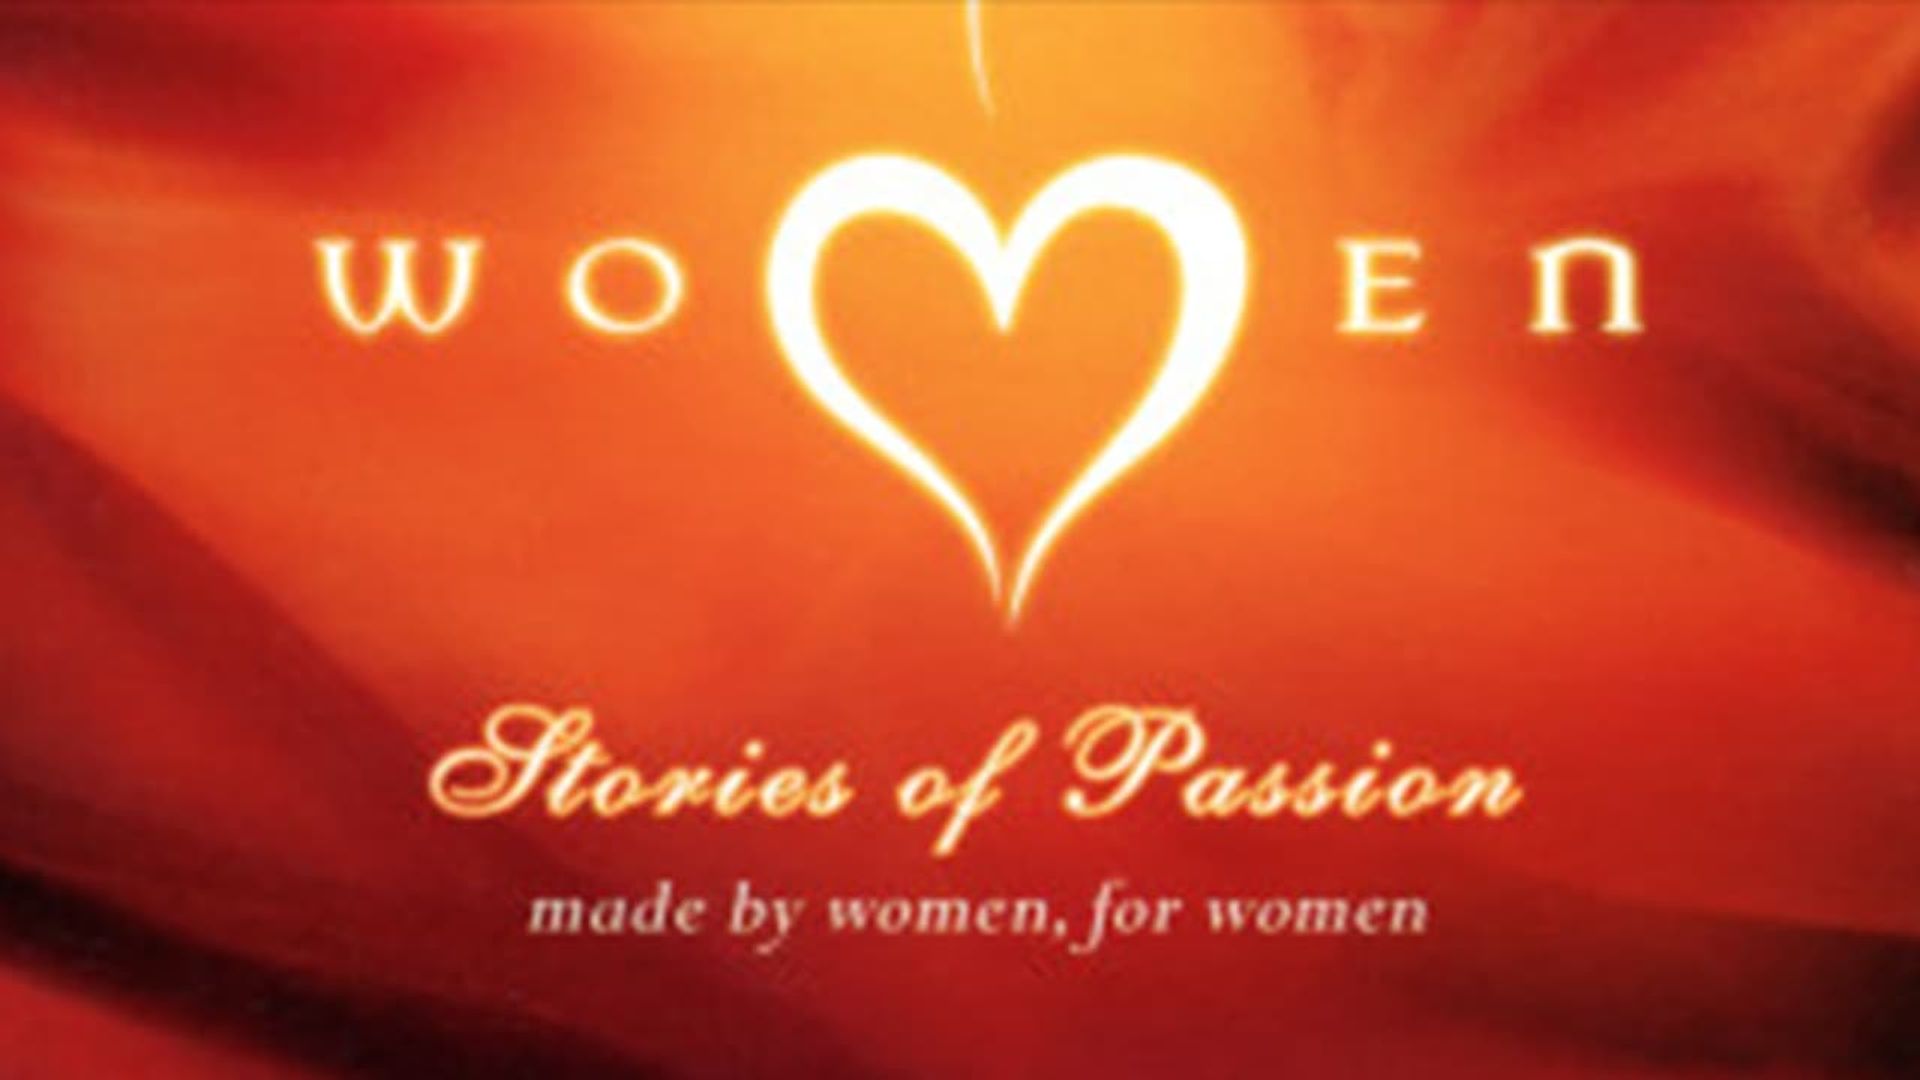 Women: Stories of Passion background